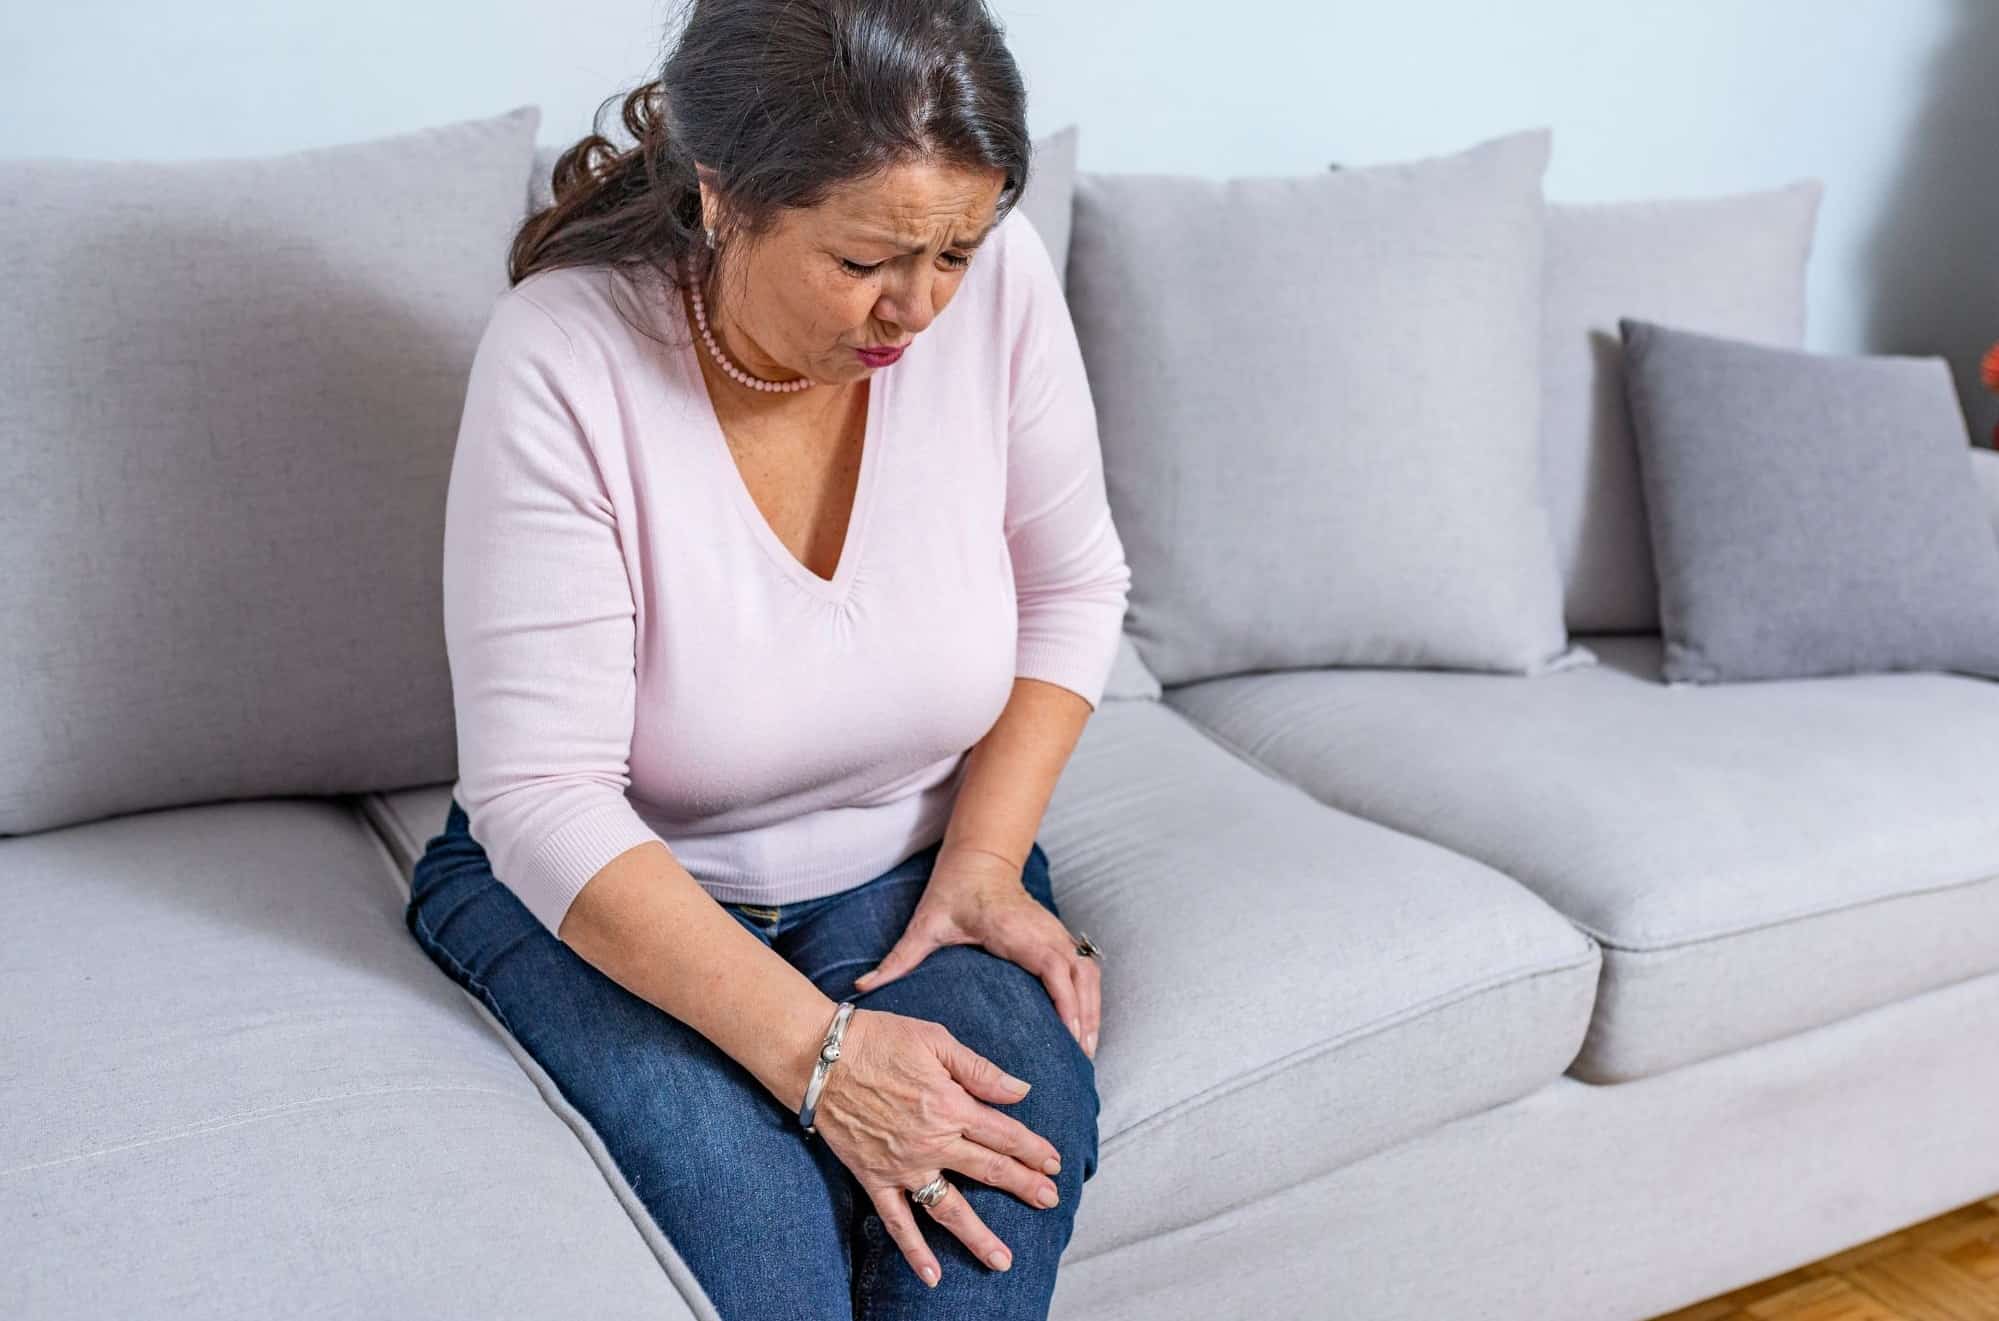 4 Common Mistakes When Treating Chronic Knee Pain